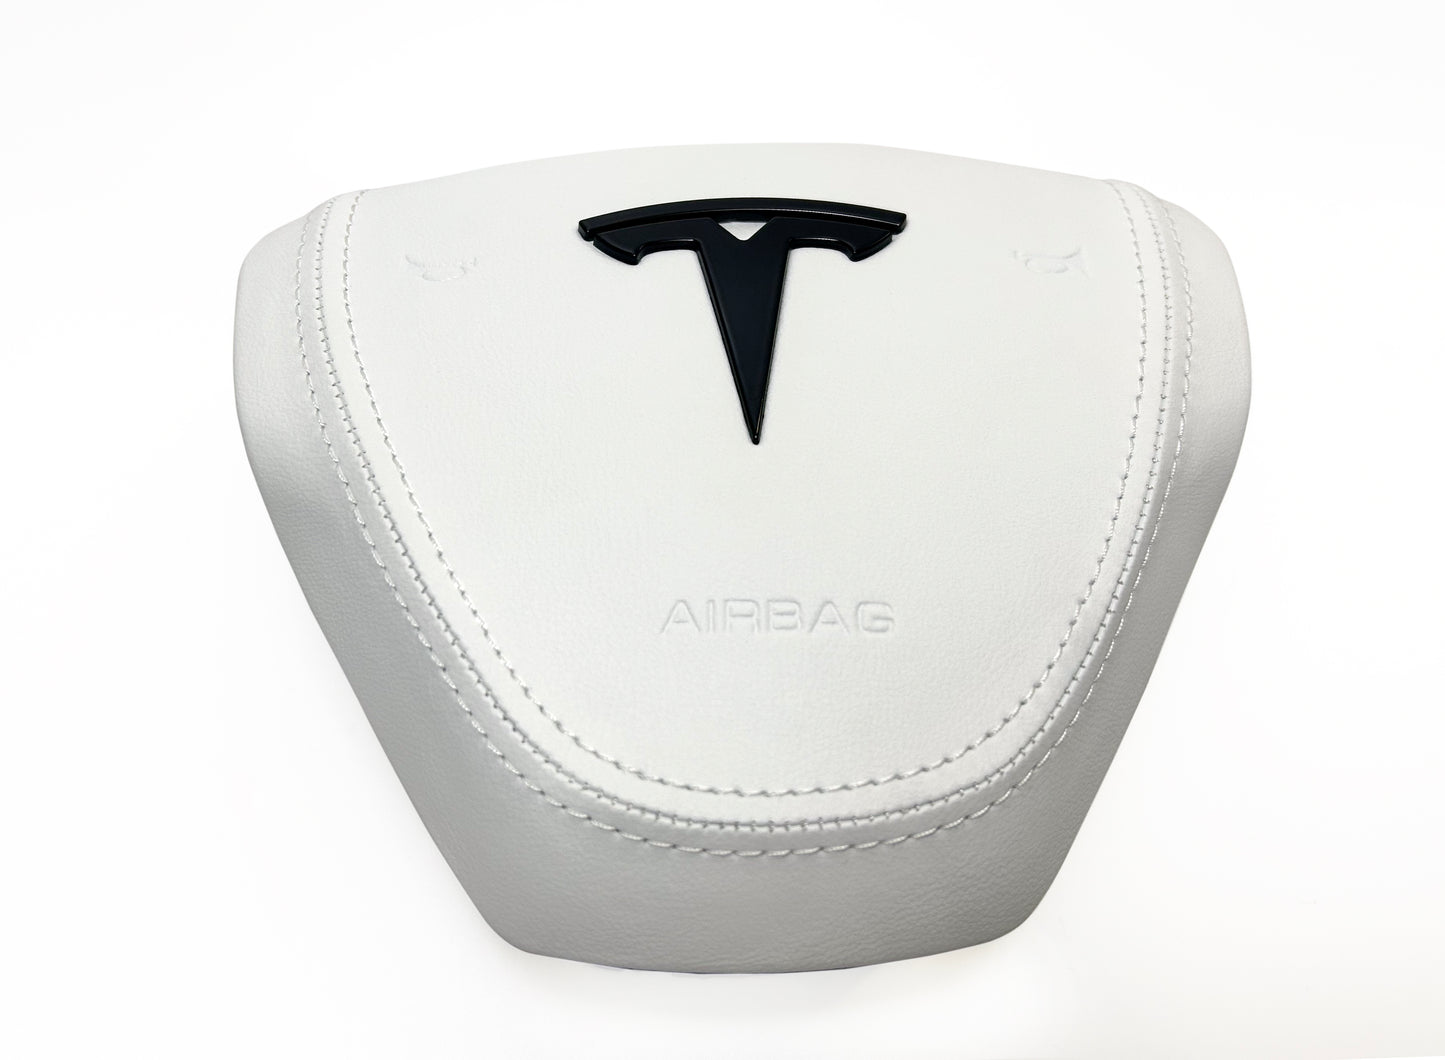 Nappa White Leather with Heated Function Yoke Steering Wheel for Model 3/Y